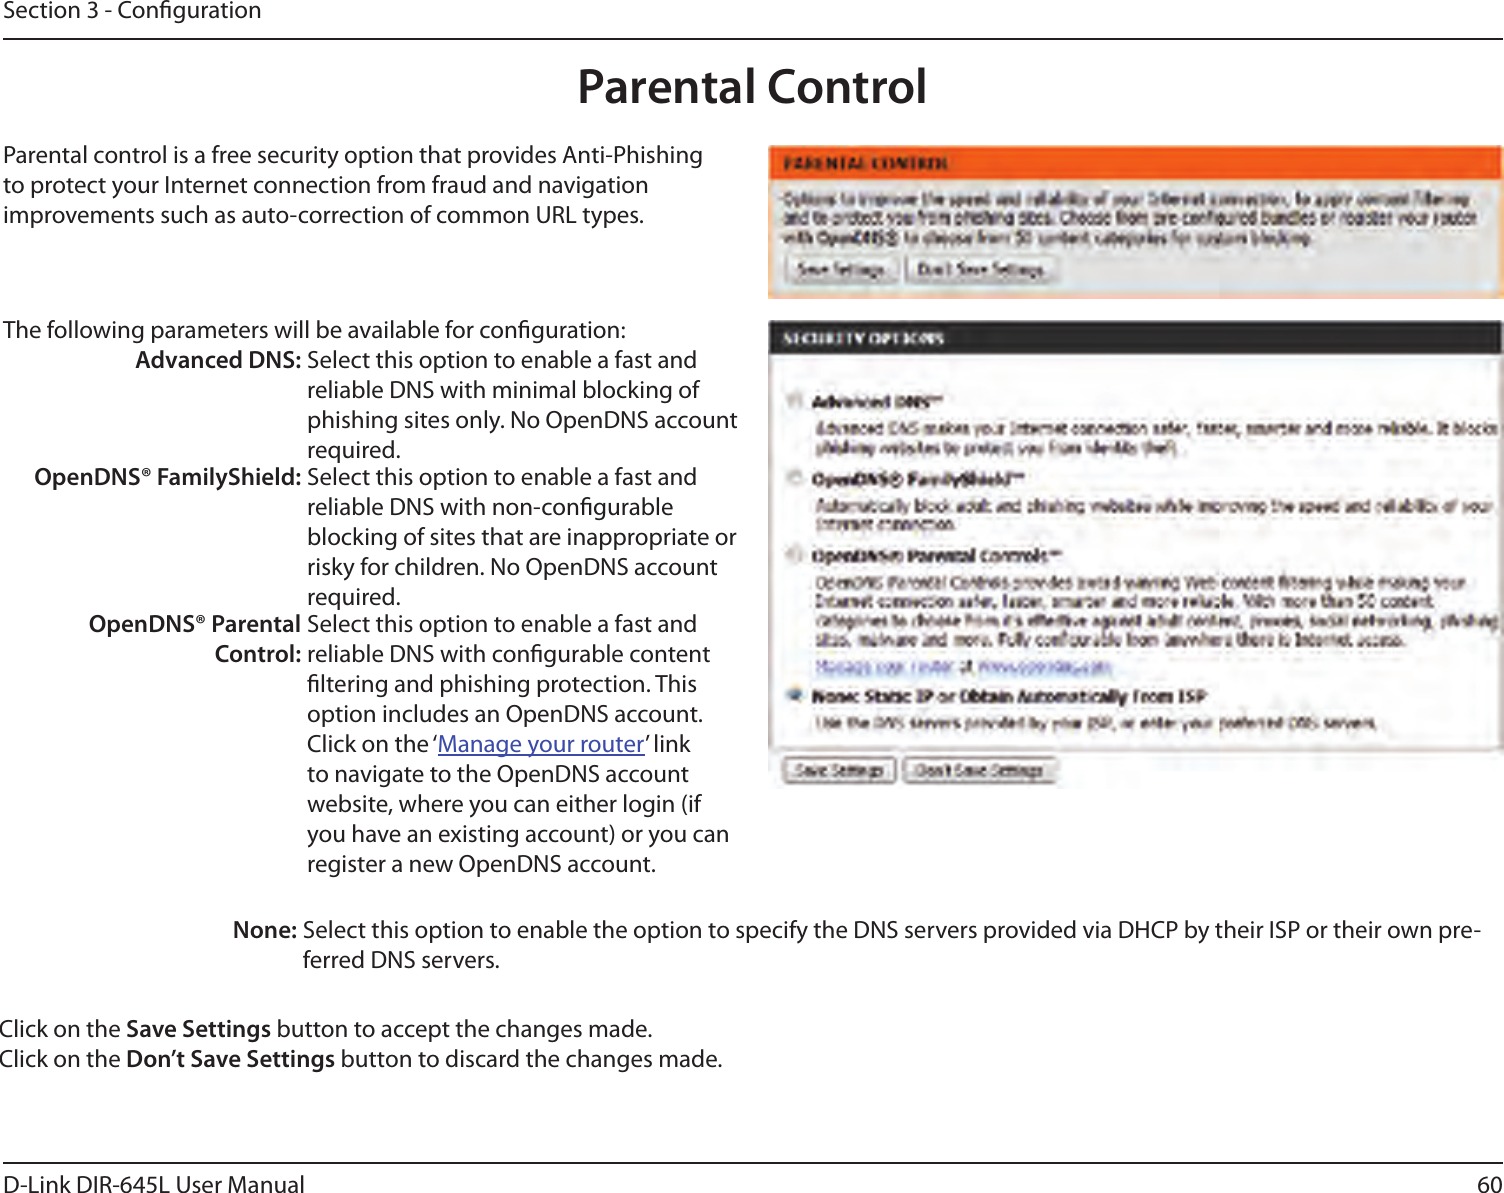 60D-Link DIR-645L User ManualSection 3 - CongurationParental ControlParental control is a free security option that provides Anti-Phishing to protect your Internet connection from fraud and navigation improvements such as auto-correction of common URL types.The following parameters will be available for conguration:Advanced DNS: Select this option to enable a fast and reliable DNS with minimal blocking of phishing sites only. No OpenDNS account required.OpenDNS® FamilyShield: Select this option to enable a fast and reliable DNS with non-congurable blocking of sites that are inappropriate or risky for children. No OpenDNS account required.OpenDNS® Parental Control:Select this option to enable a fast and reliable DNS with congurable content ltering and phishing protection. This option includes an OpenDNS account. Click on the ‘Manage your router’ link to navigate to the OpenDNS account website, where you can either login (if you have an existing account) or you can register a new OpenDNS account. None: Select this option to enable the option to specify the DNS servers provided via DHCP by their ISP or their own pre-ferred DNS servers.Click on the Save Settings button to accept the changes made.Click on the Don’t Save Settings button to discard the changes made.